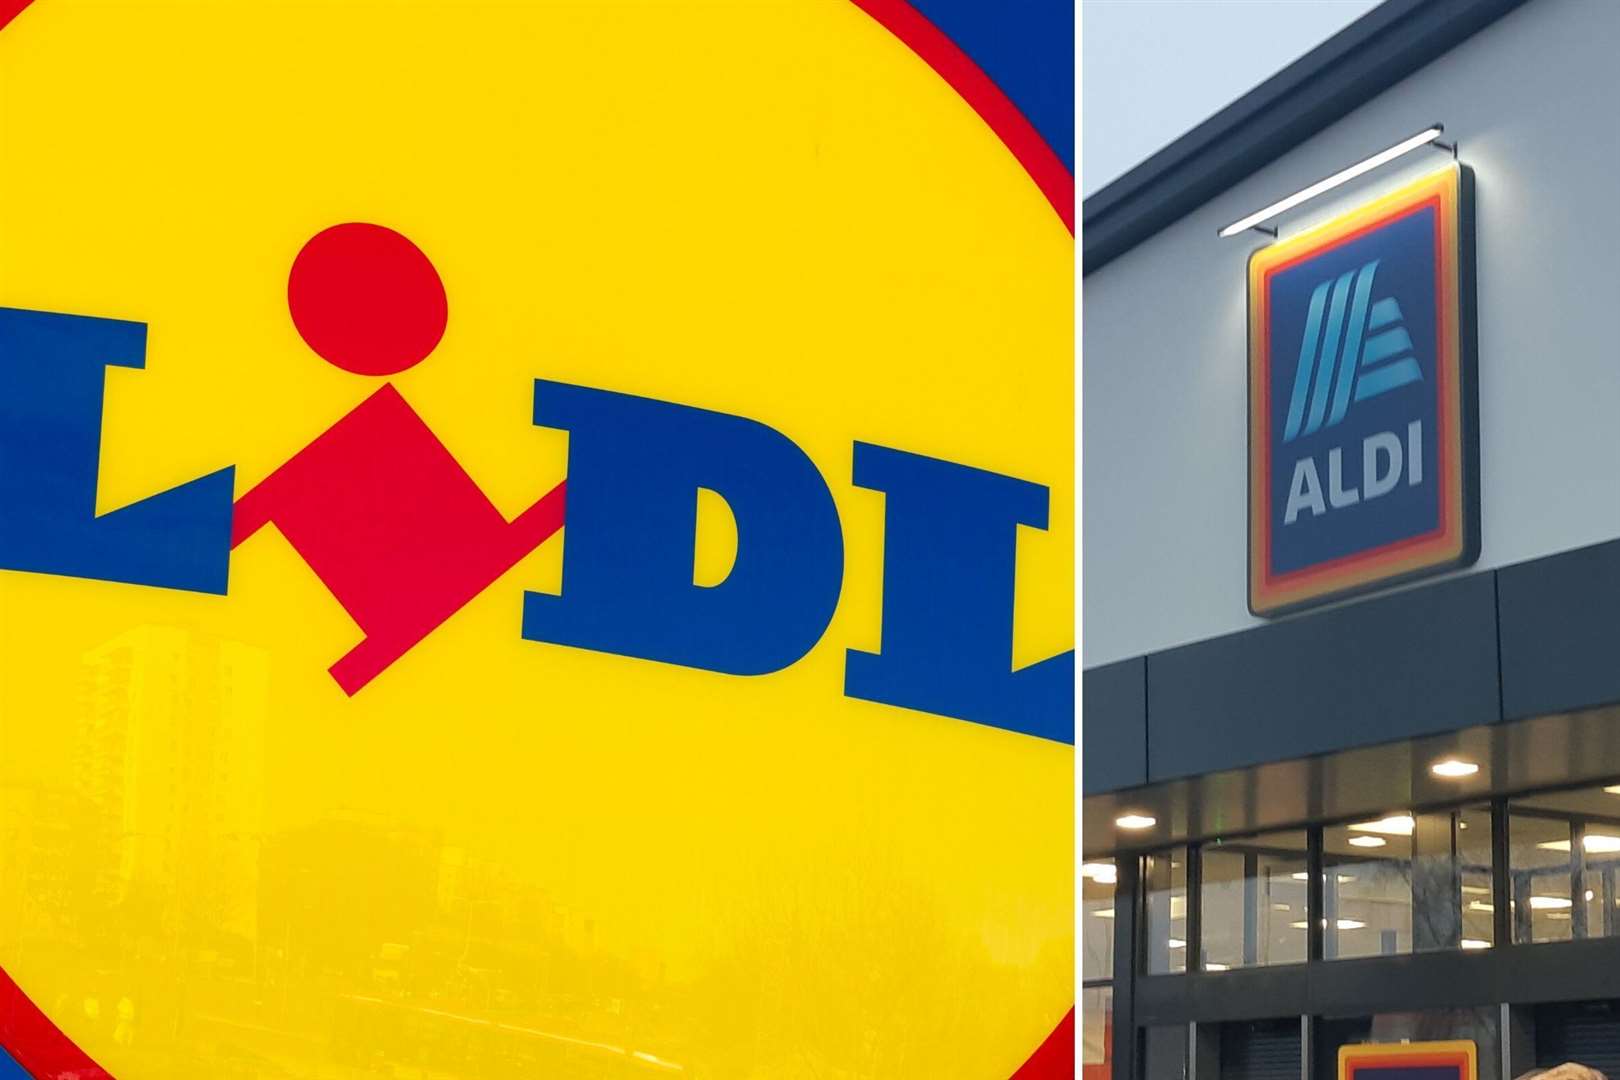 There aren't designated hours at either Lidl or Aldi as of yet